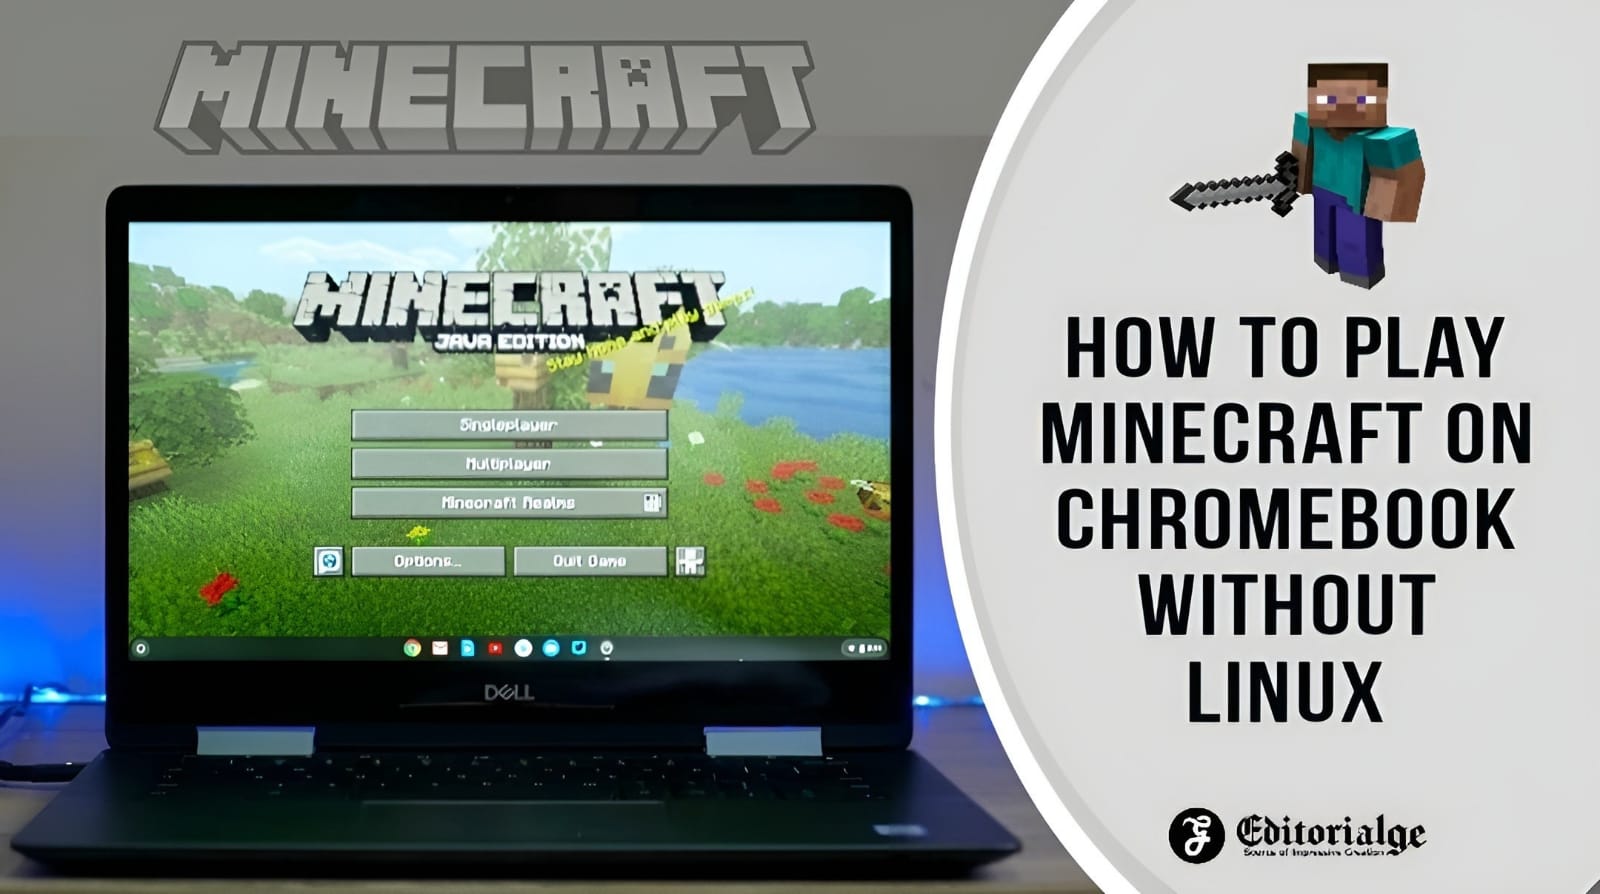 how to play minecraft on chromebook without linux